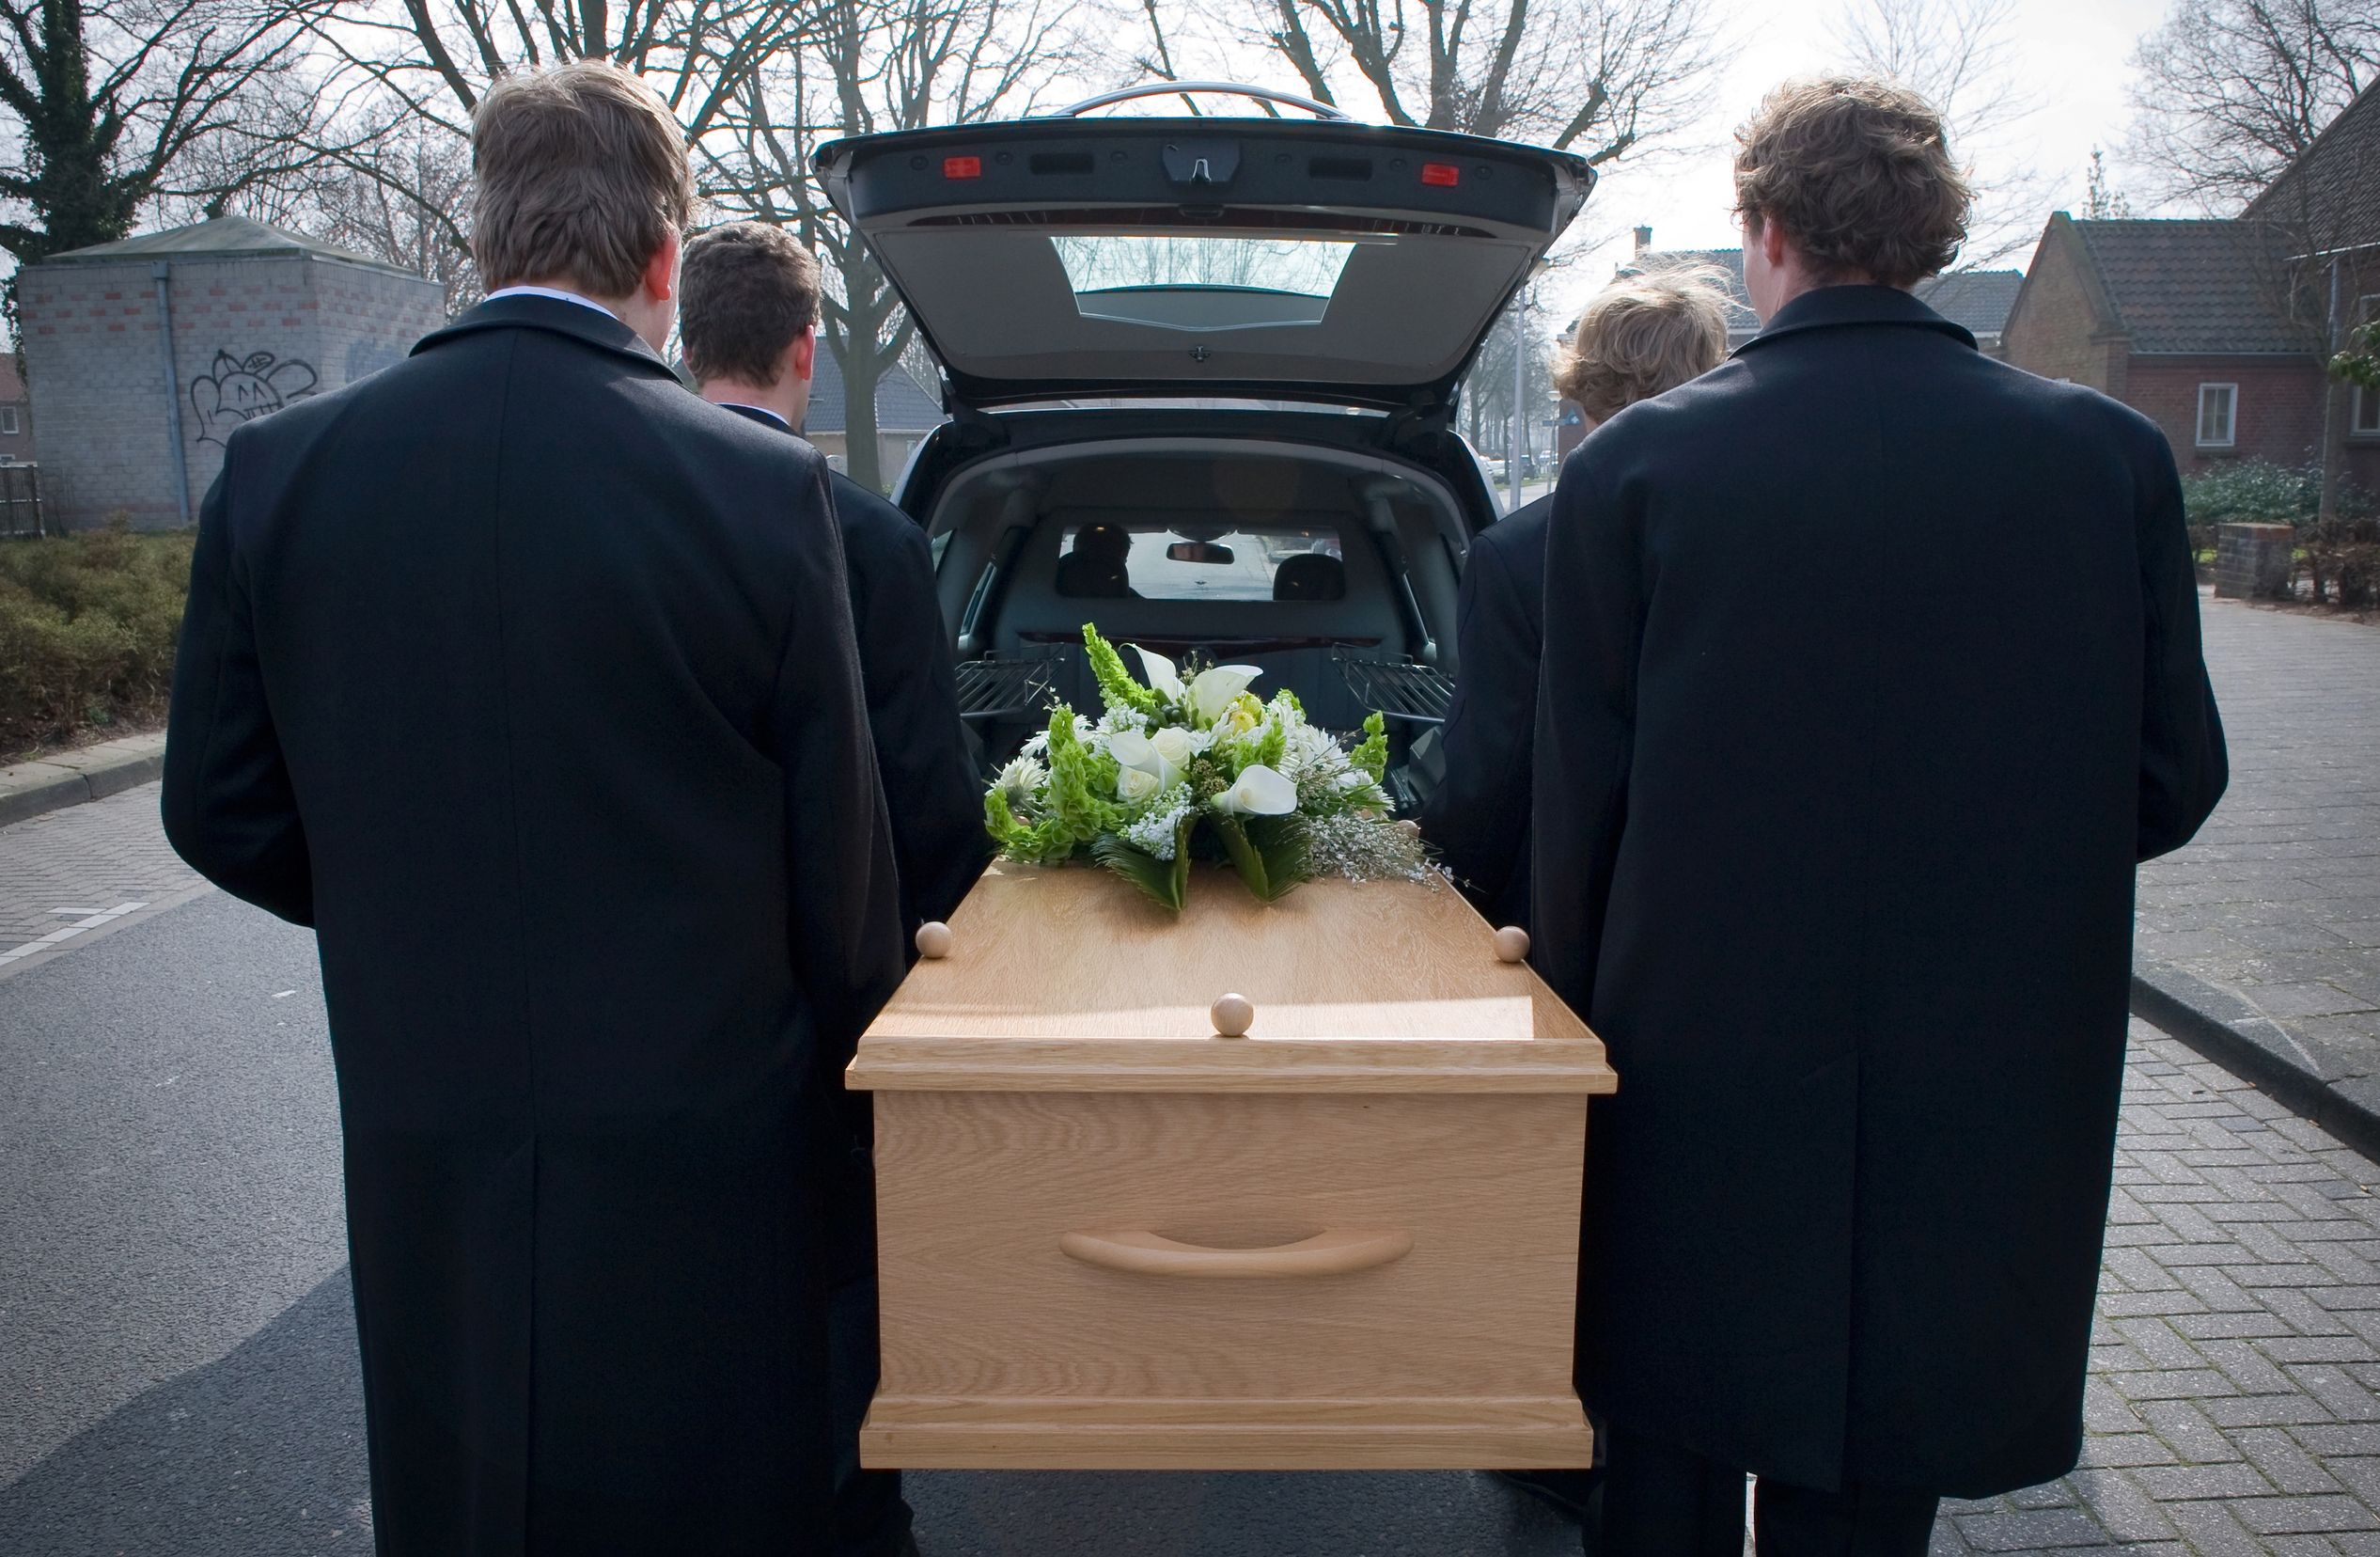 Great Ways to Personalize a Funeral While Keeping Costs Affordable